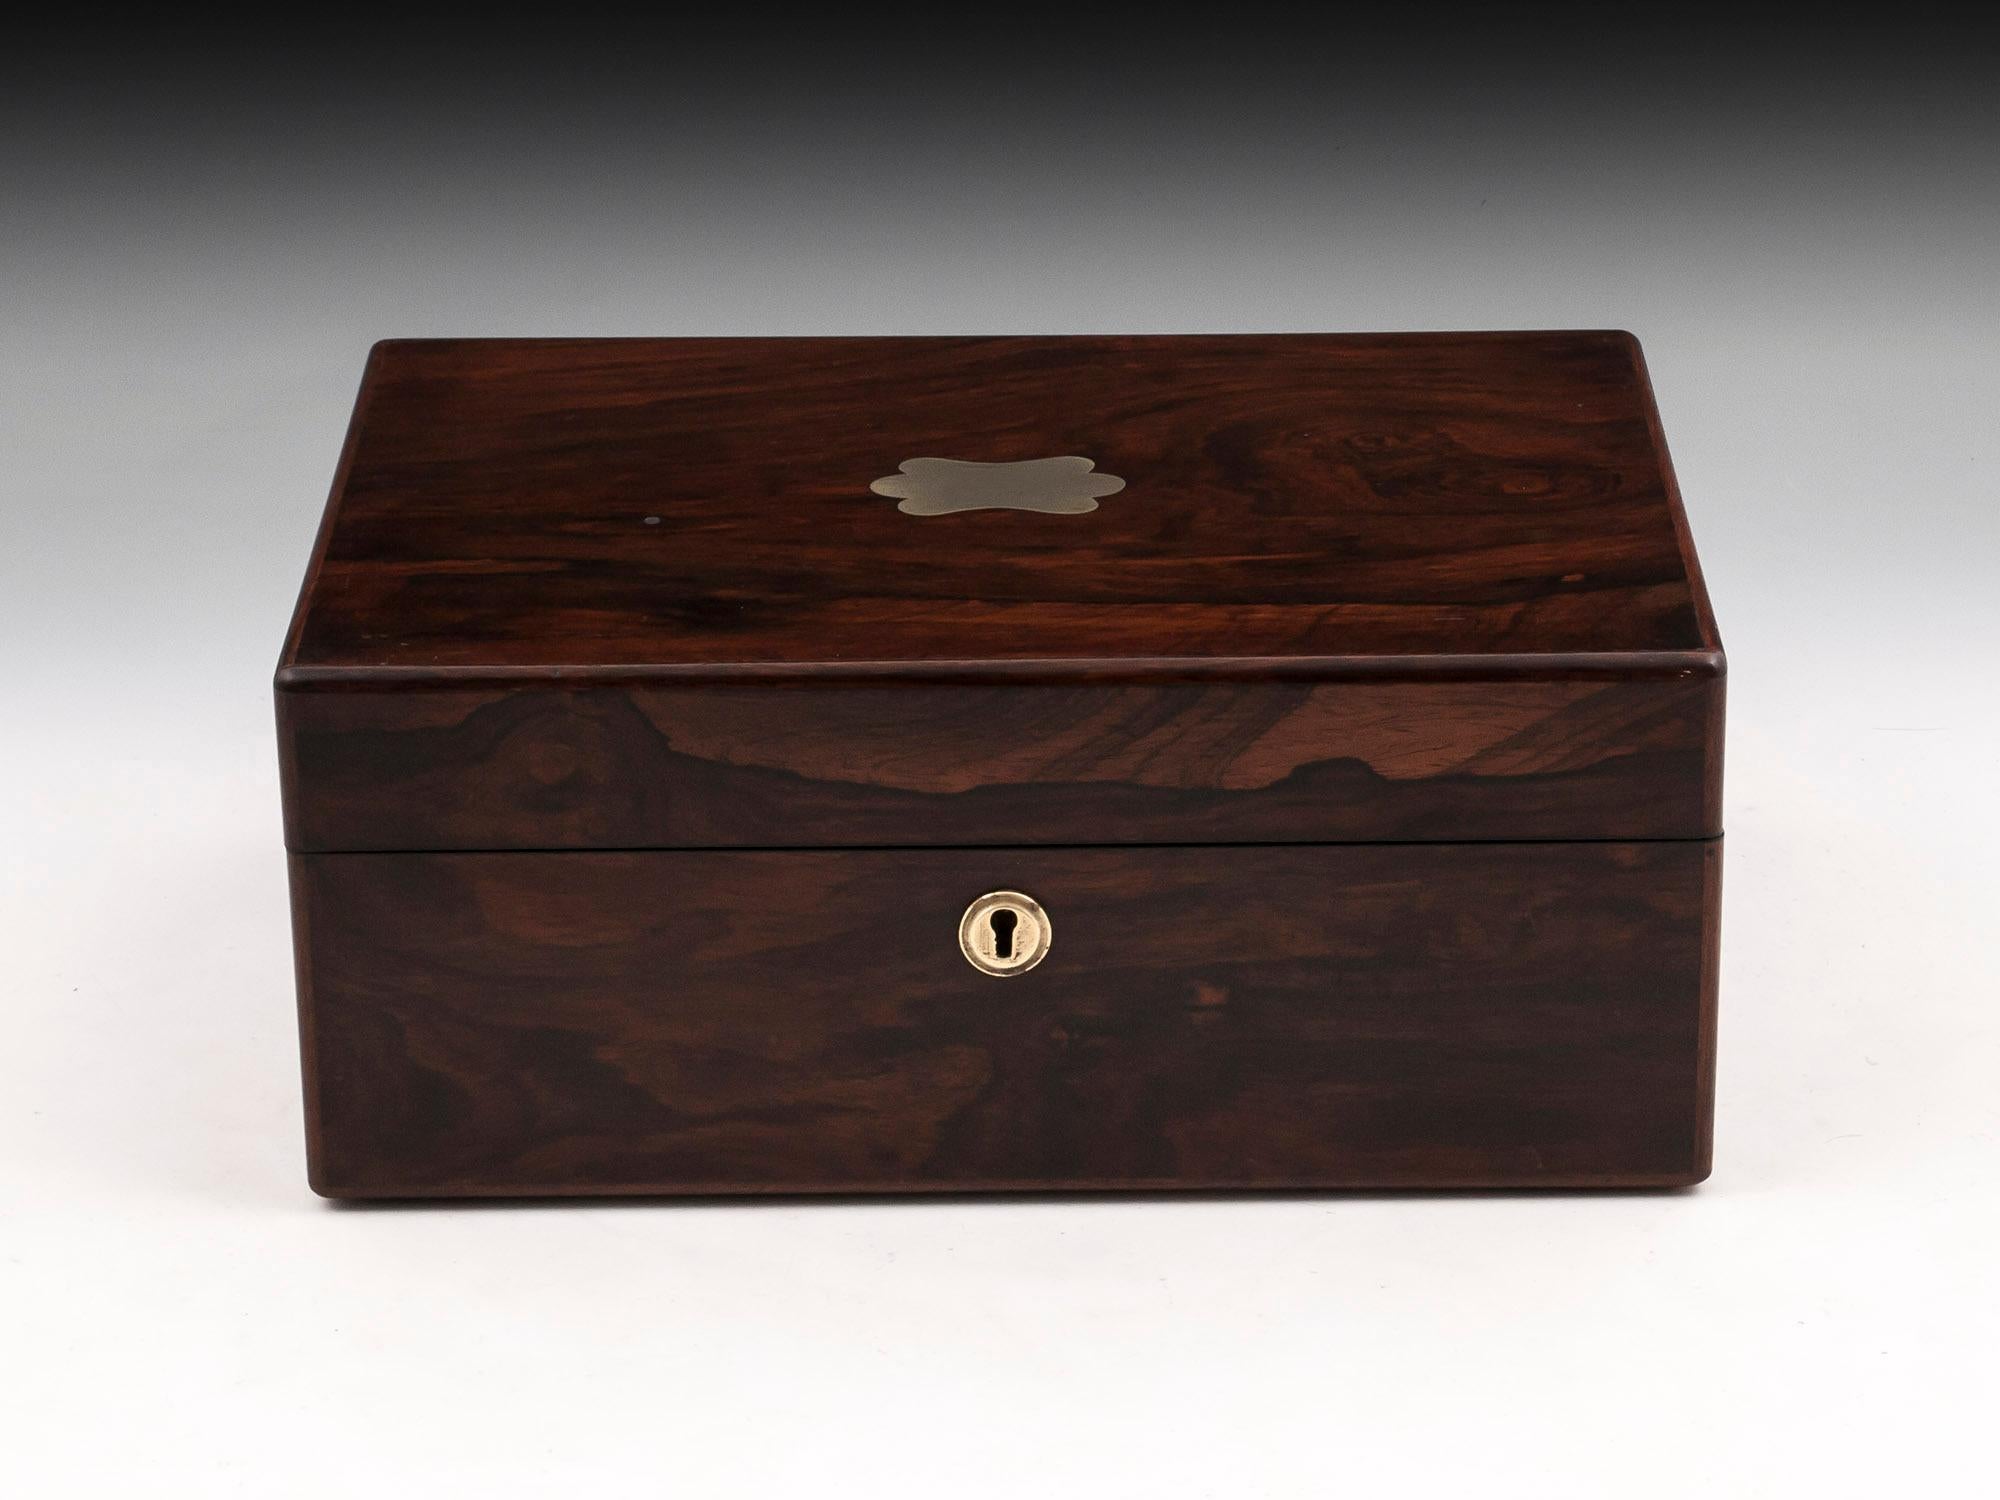 Antique Jewelry Box veneered in beautiful figured mahogany with brass escutcheon and vacant initial plate.

The interior is lined in vibrant red velvet and silk paper. It contains a removable jewelry tray with seven padded compartments of which two